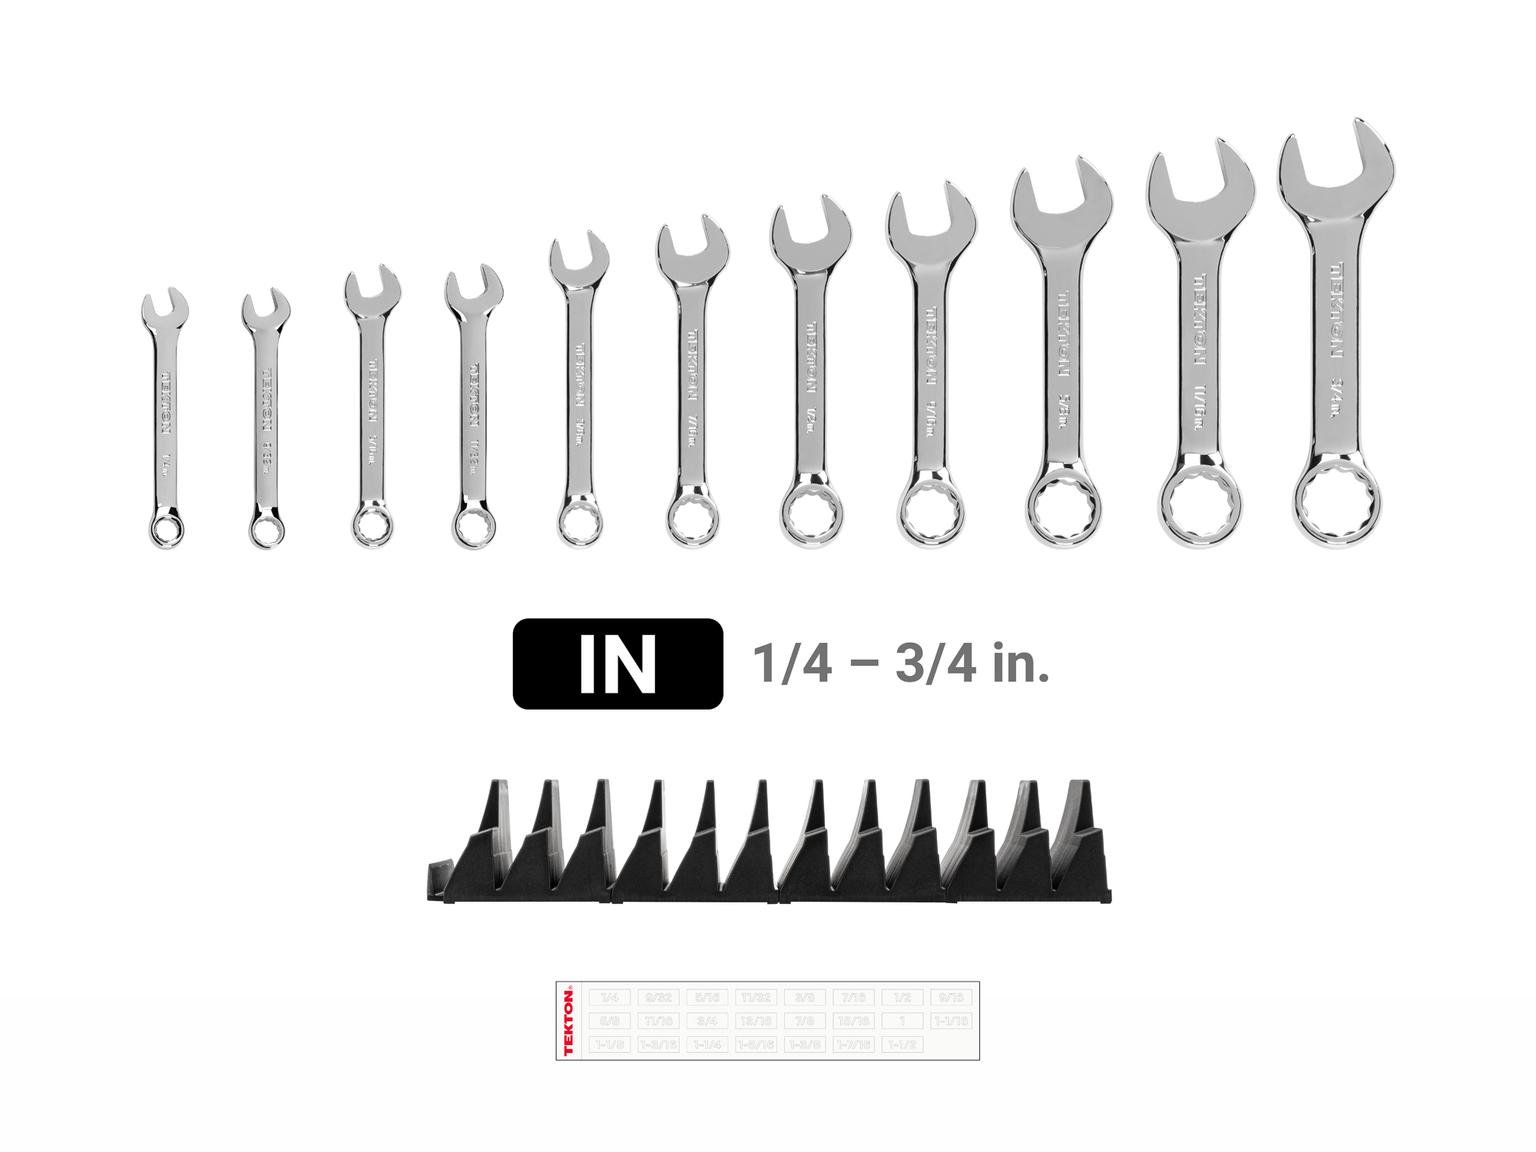 TEKTON WCB95401-T Stubby Combination Wrench Set with Modular Slotted Organizer, 11-Piece (1/4 - 3/4 in.)